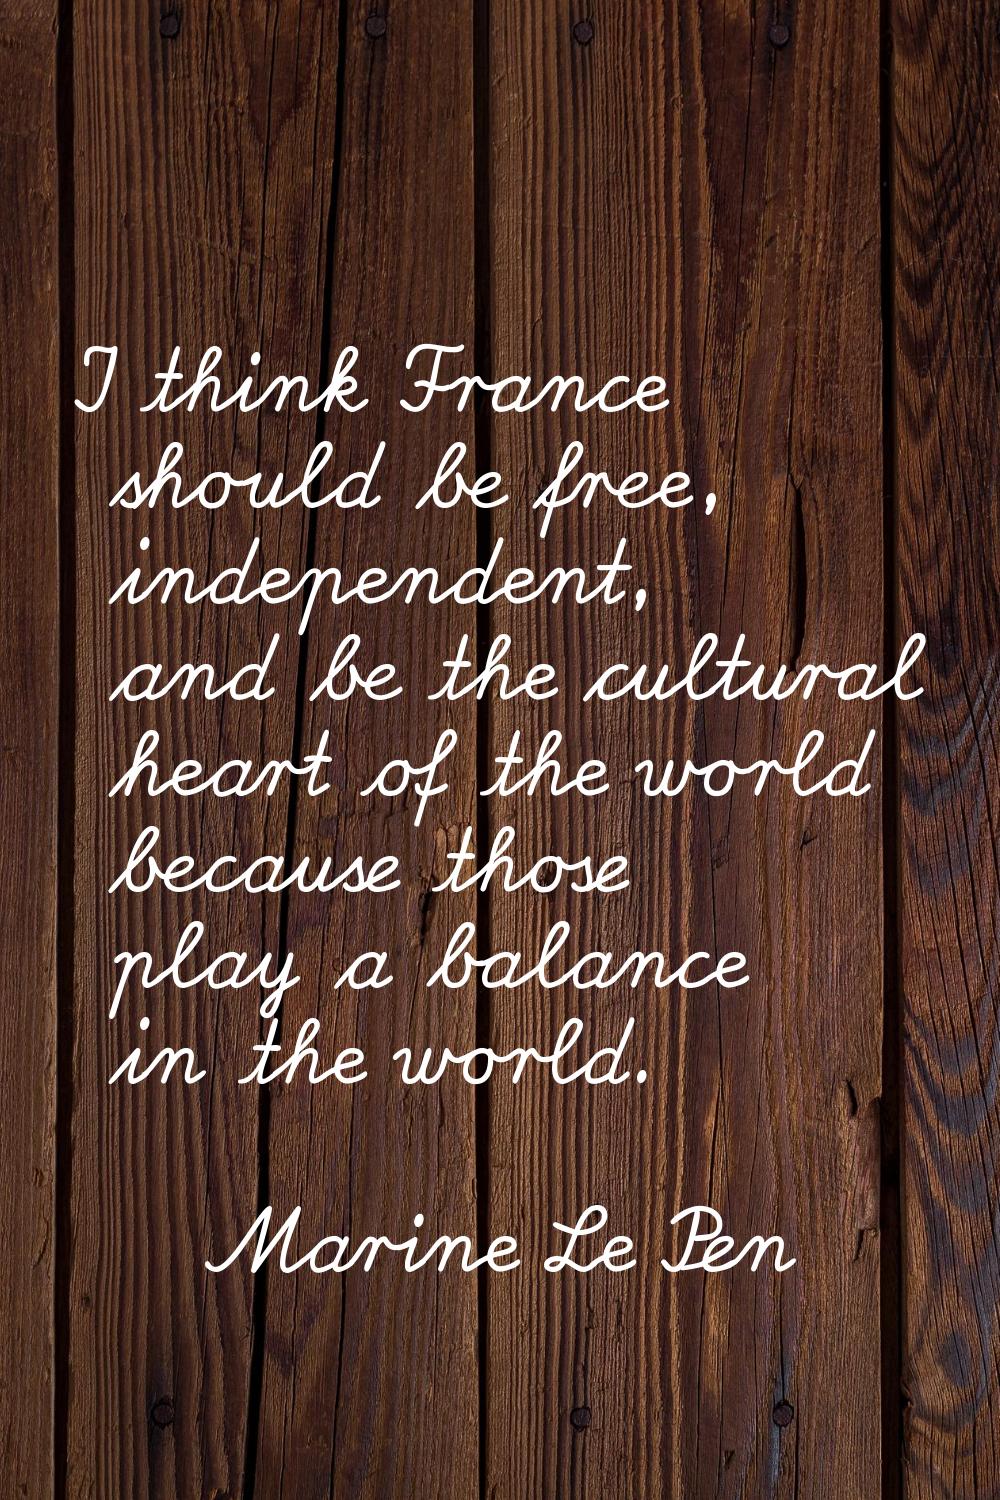 I think France should be free, independent, and be the cultural heart of the world because those pl